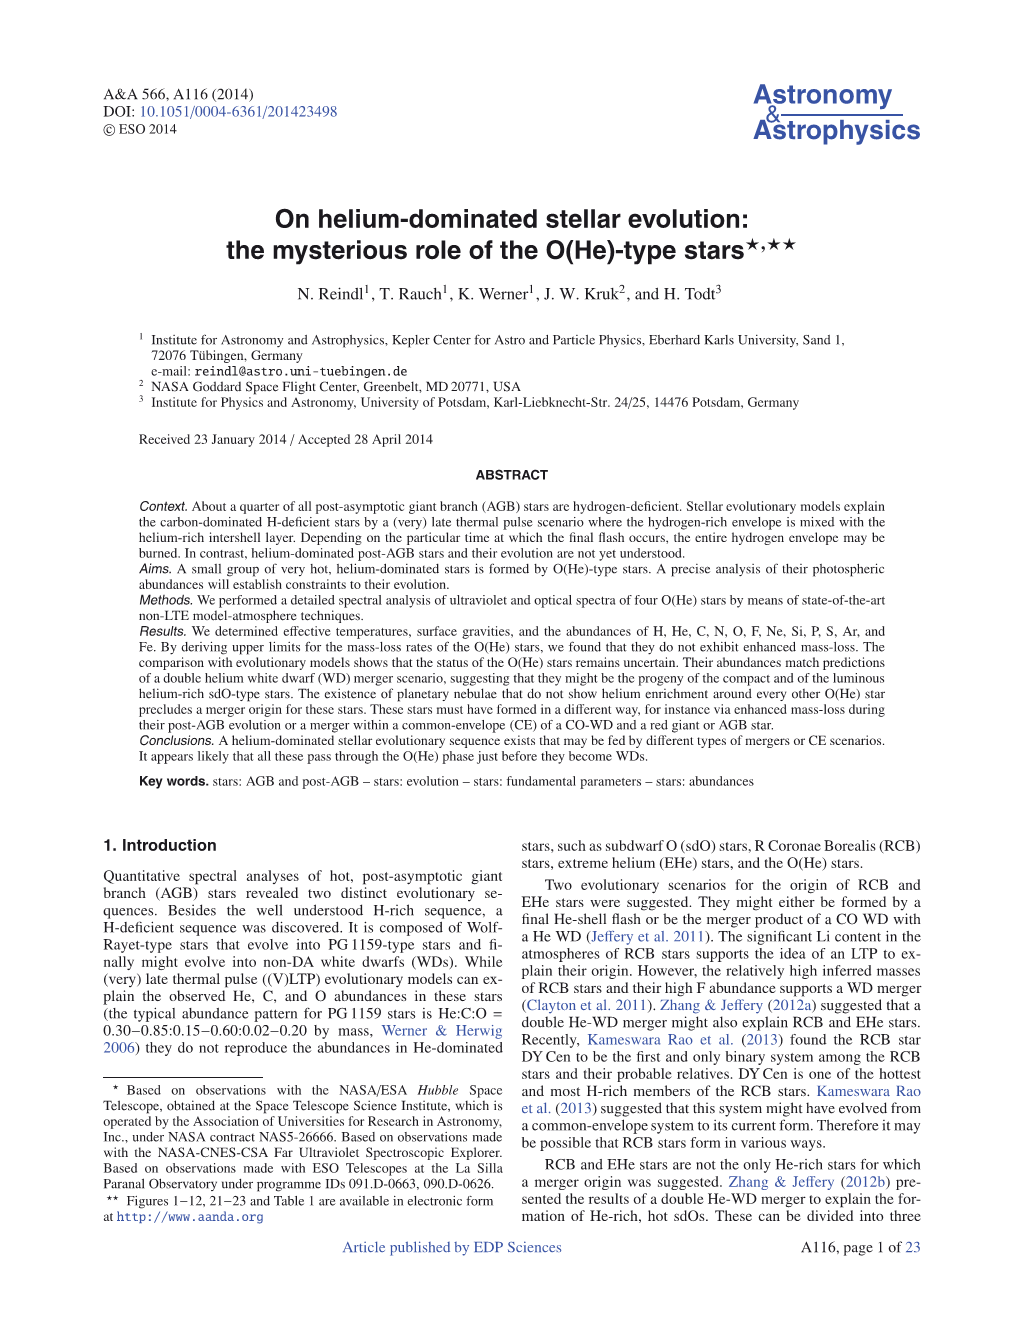 On Helium-Dominated Stellar Evolution: the Mysterious Role of the O\(He